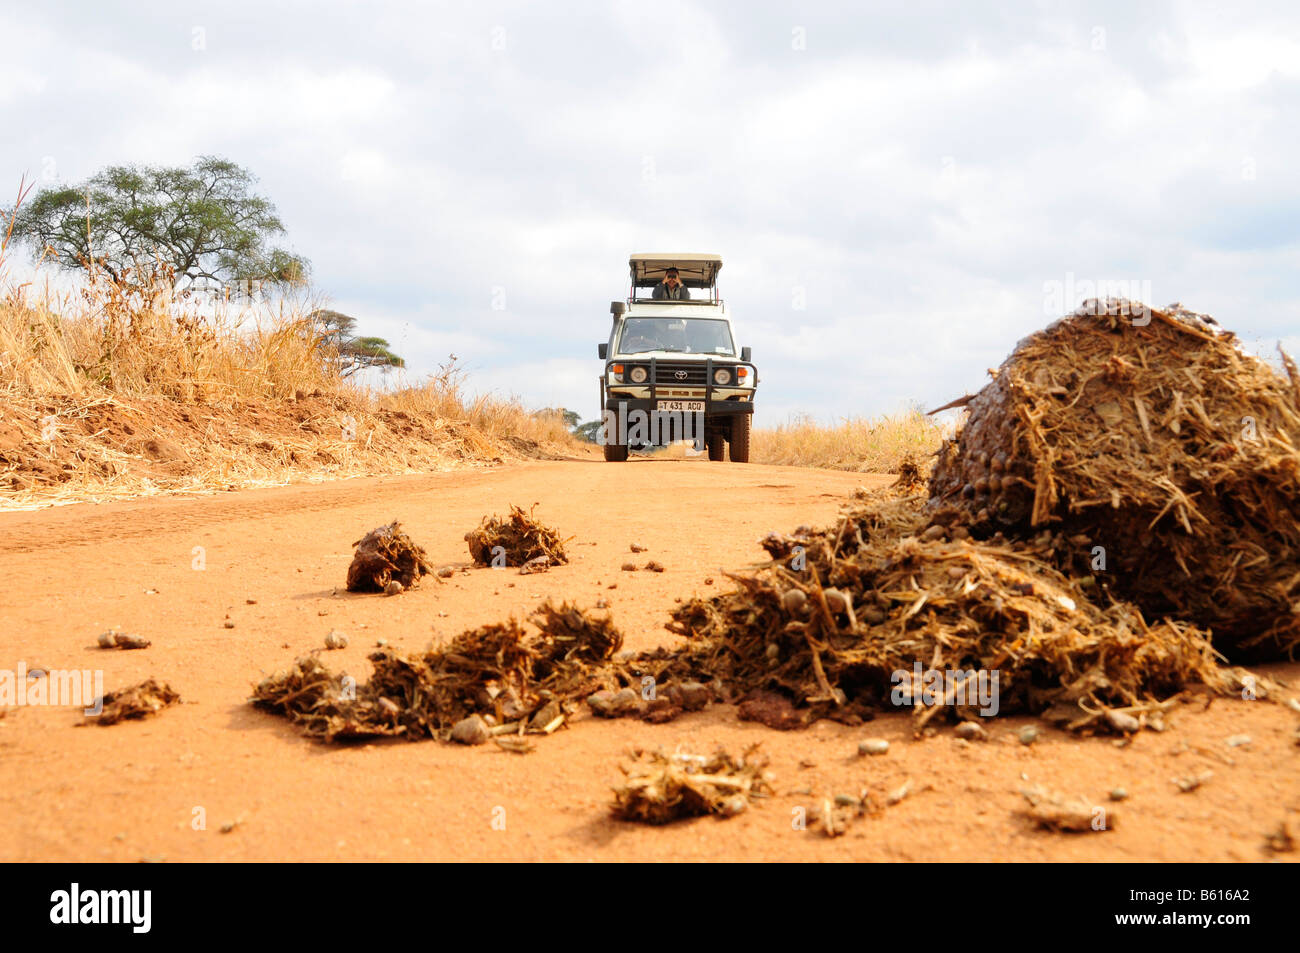 Four wheel drive vehicle with tourists in front of a pile of droppings, Tarangire-National Park, Tanzania, Africa Stock Photo